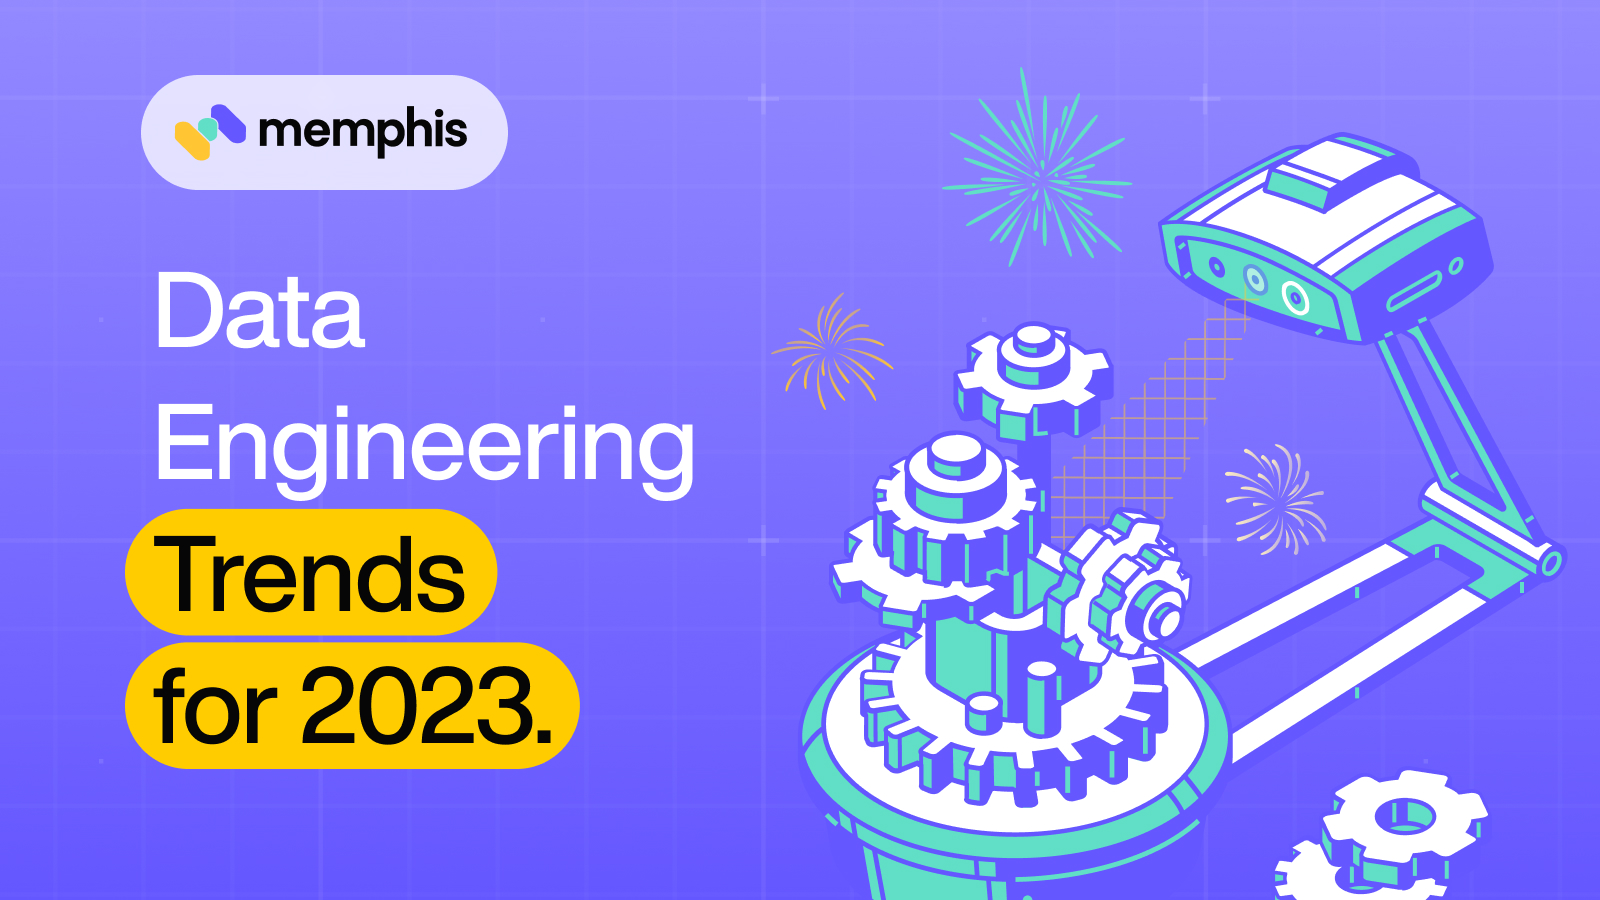 Data Engineering Trends for 2023